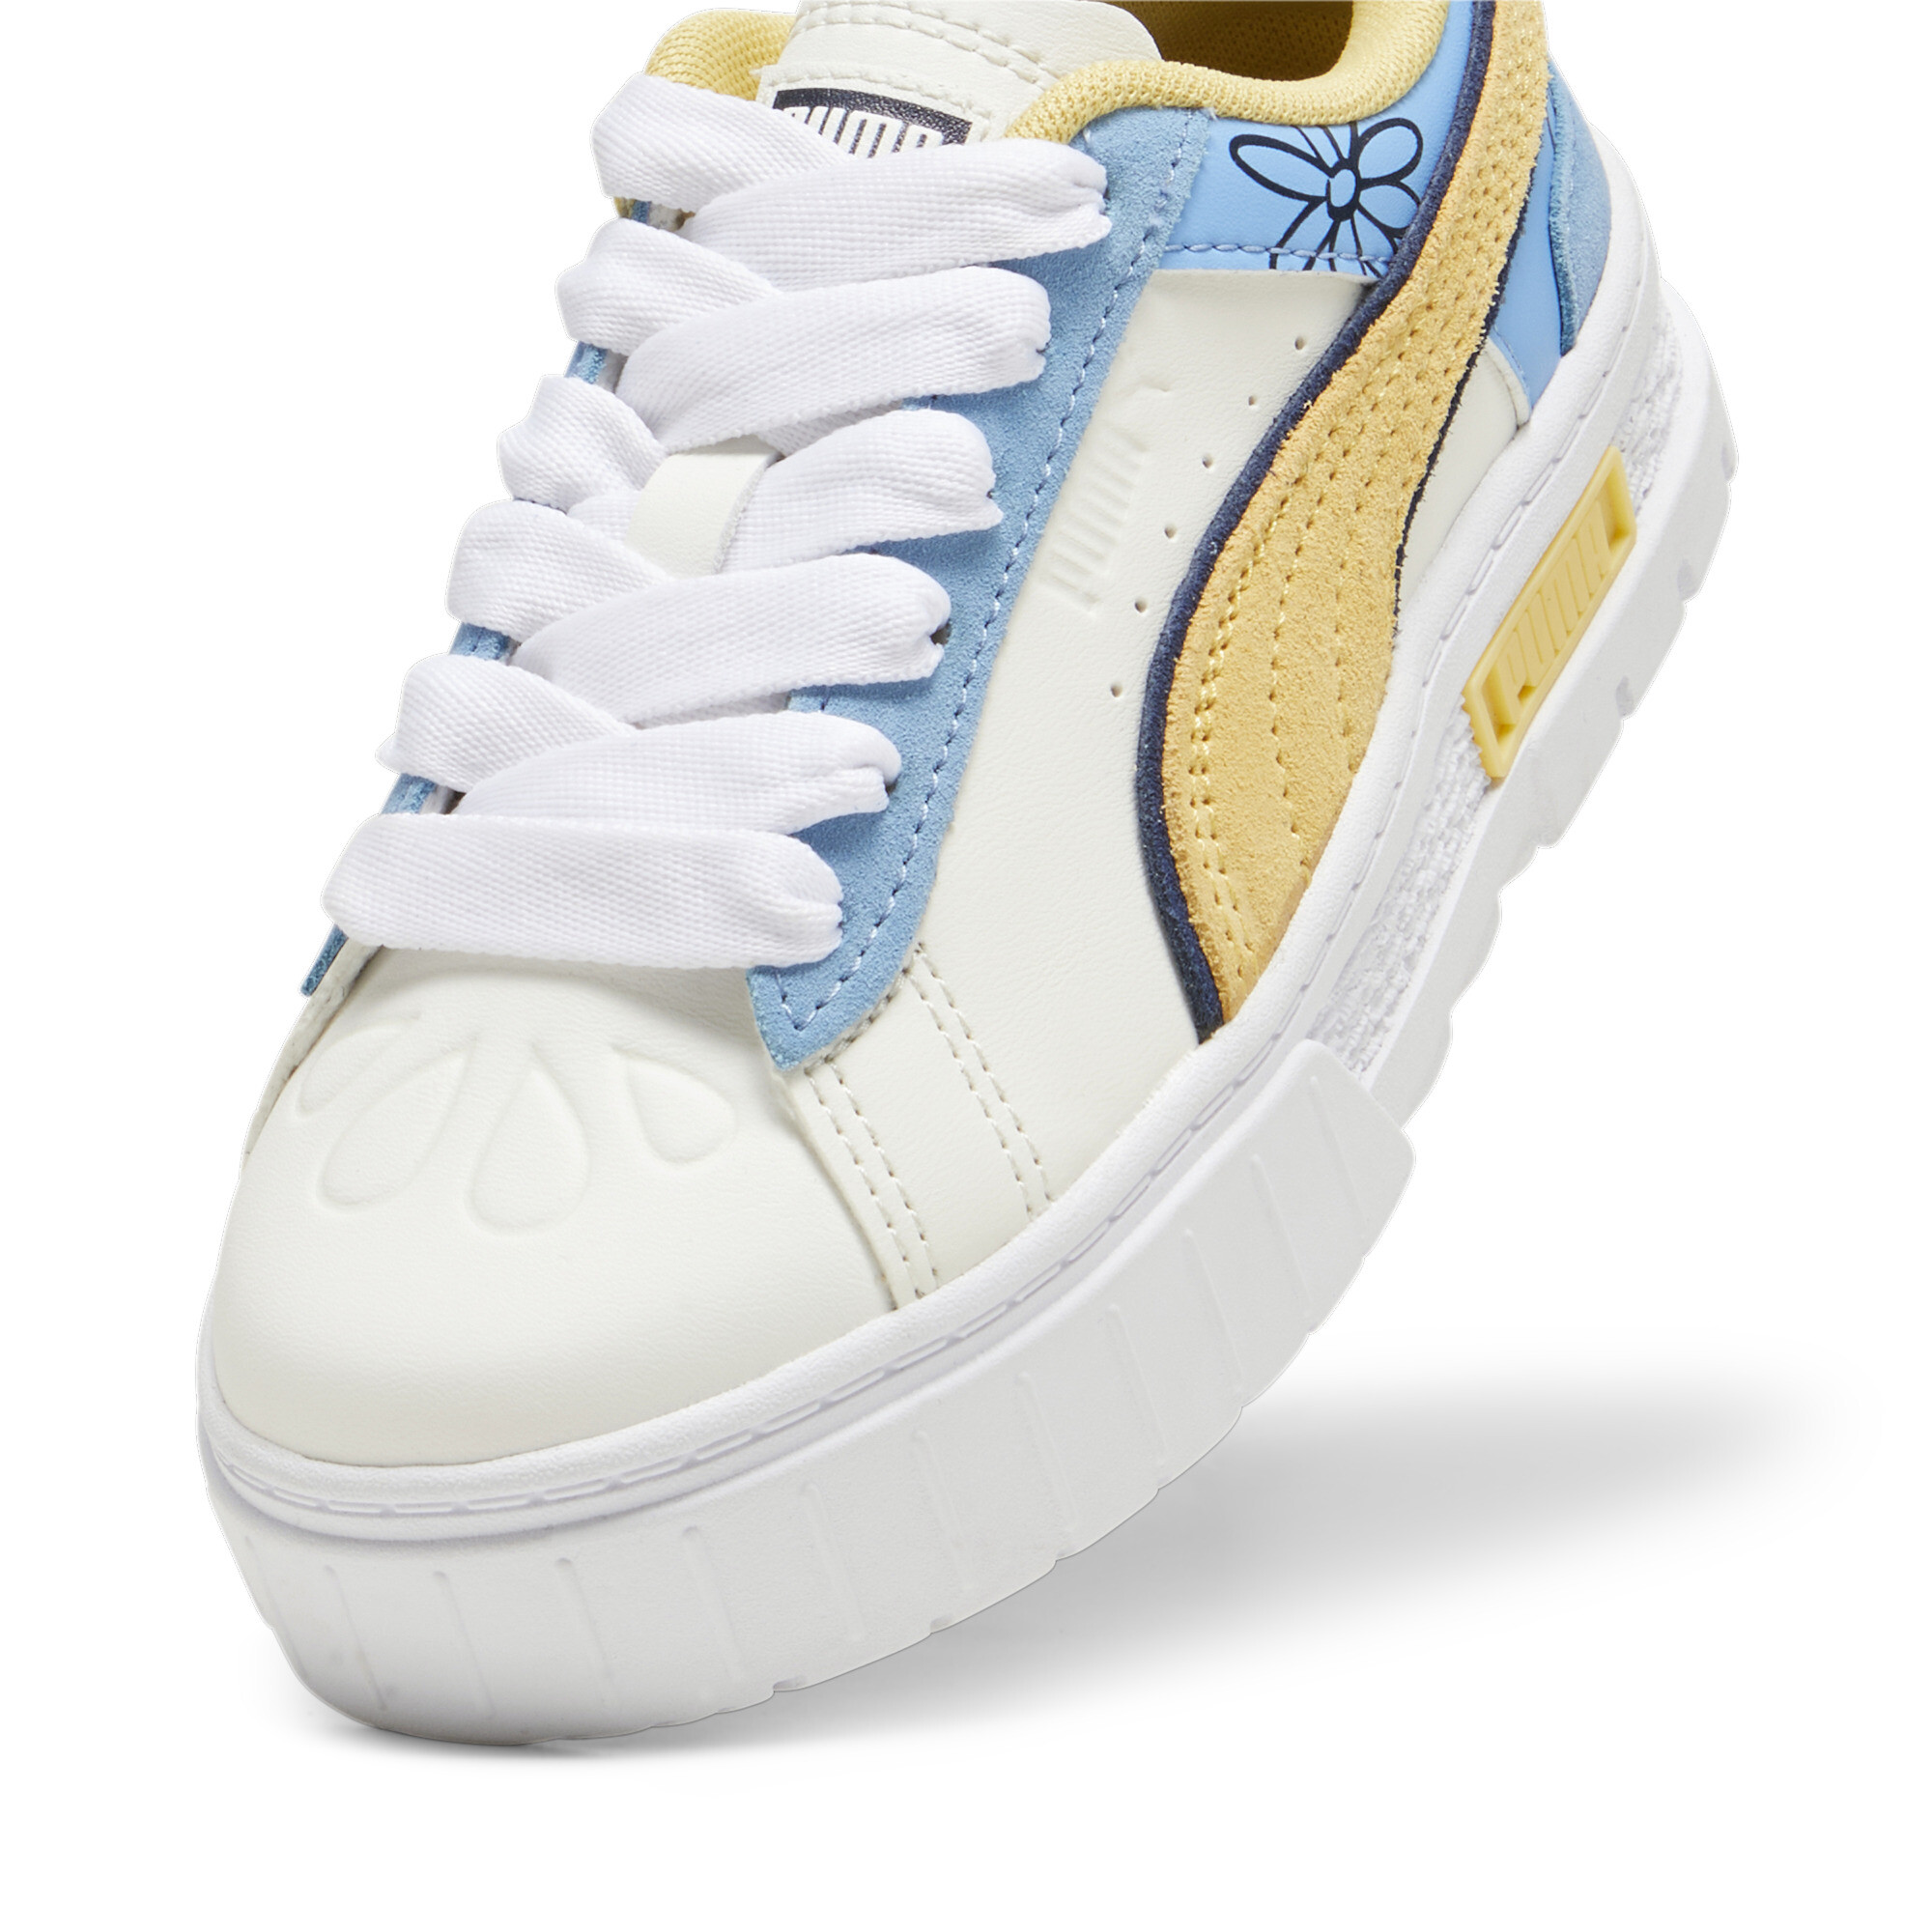 Puma X THE SMURFS Mayze Kids' Sneakers, White, Size 31, Shoes